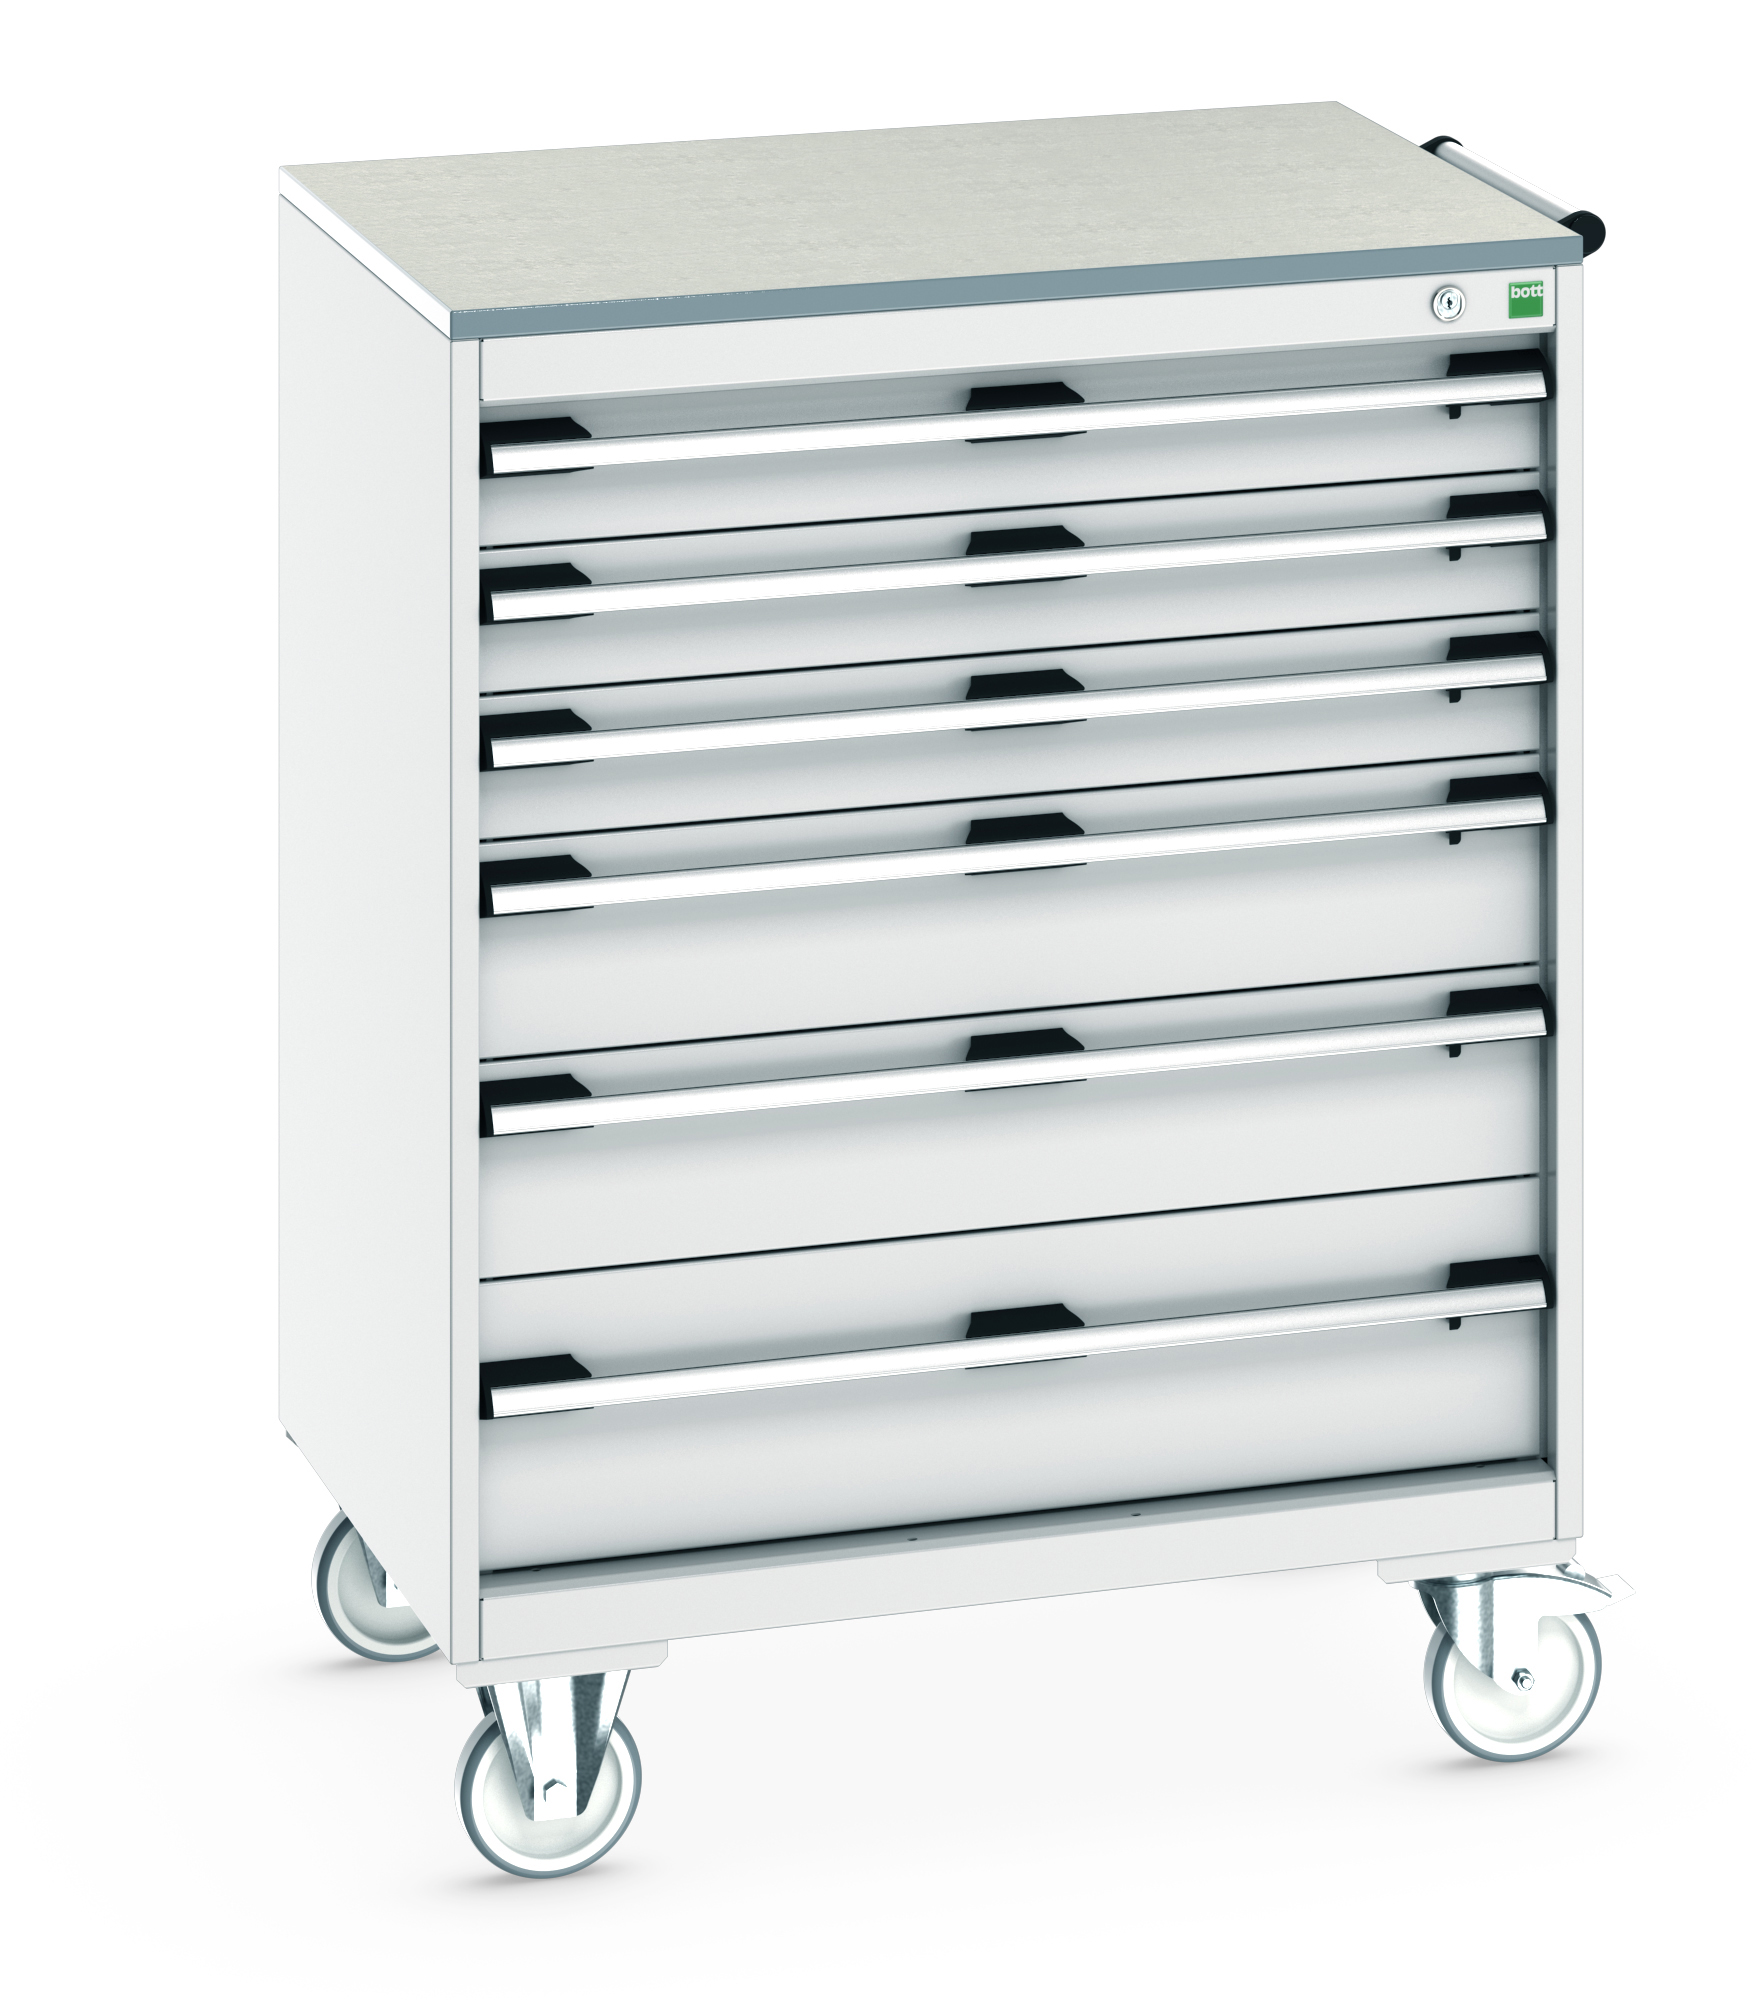 Bott Cubio Mobile Drawer Cabinet With 6 Drawers & Lino Worktop - 40402160.16V